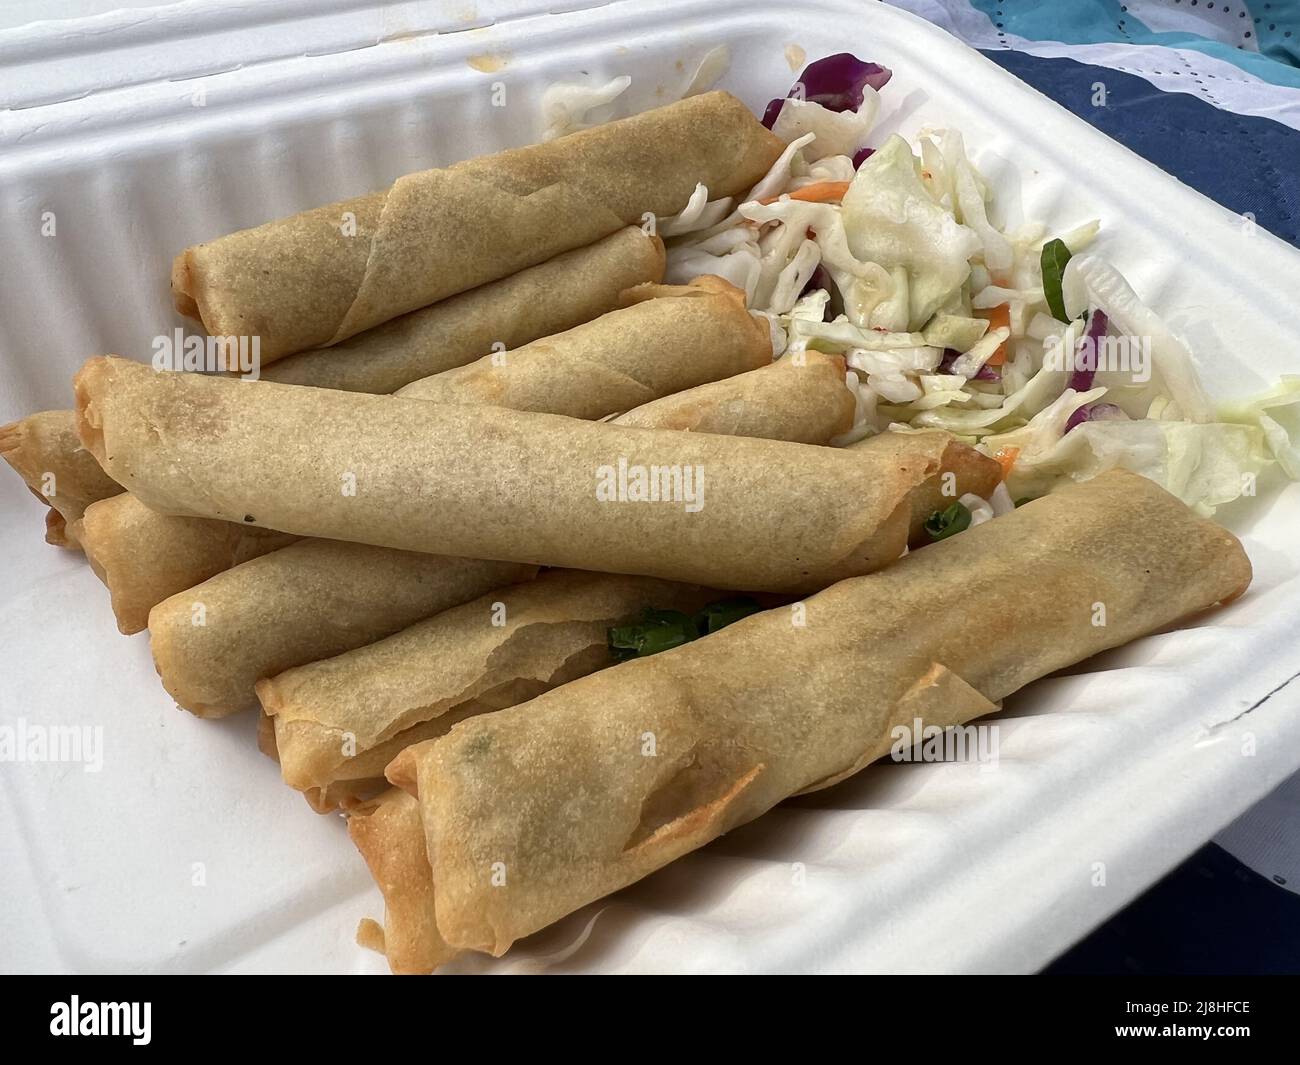 Take-out lumpia, or Filipino spring rolls, from a restaurant popup of the Lumpia Company, Lafayette, California, March 18, 2022. Photo courtesy Sftm. Stock Photo